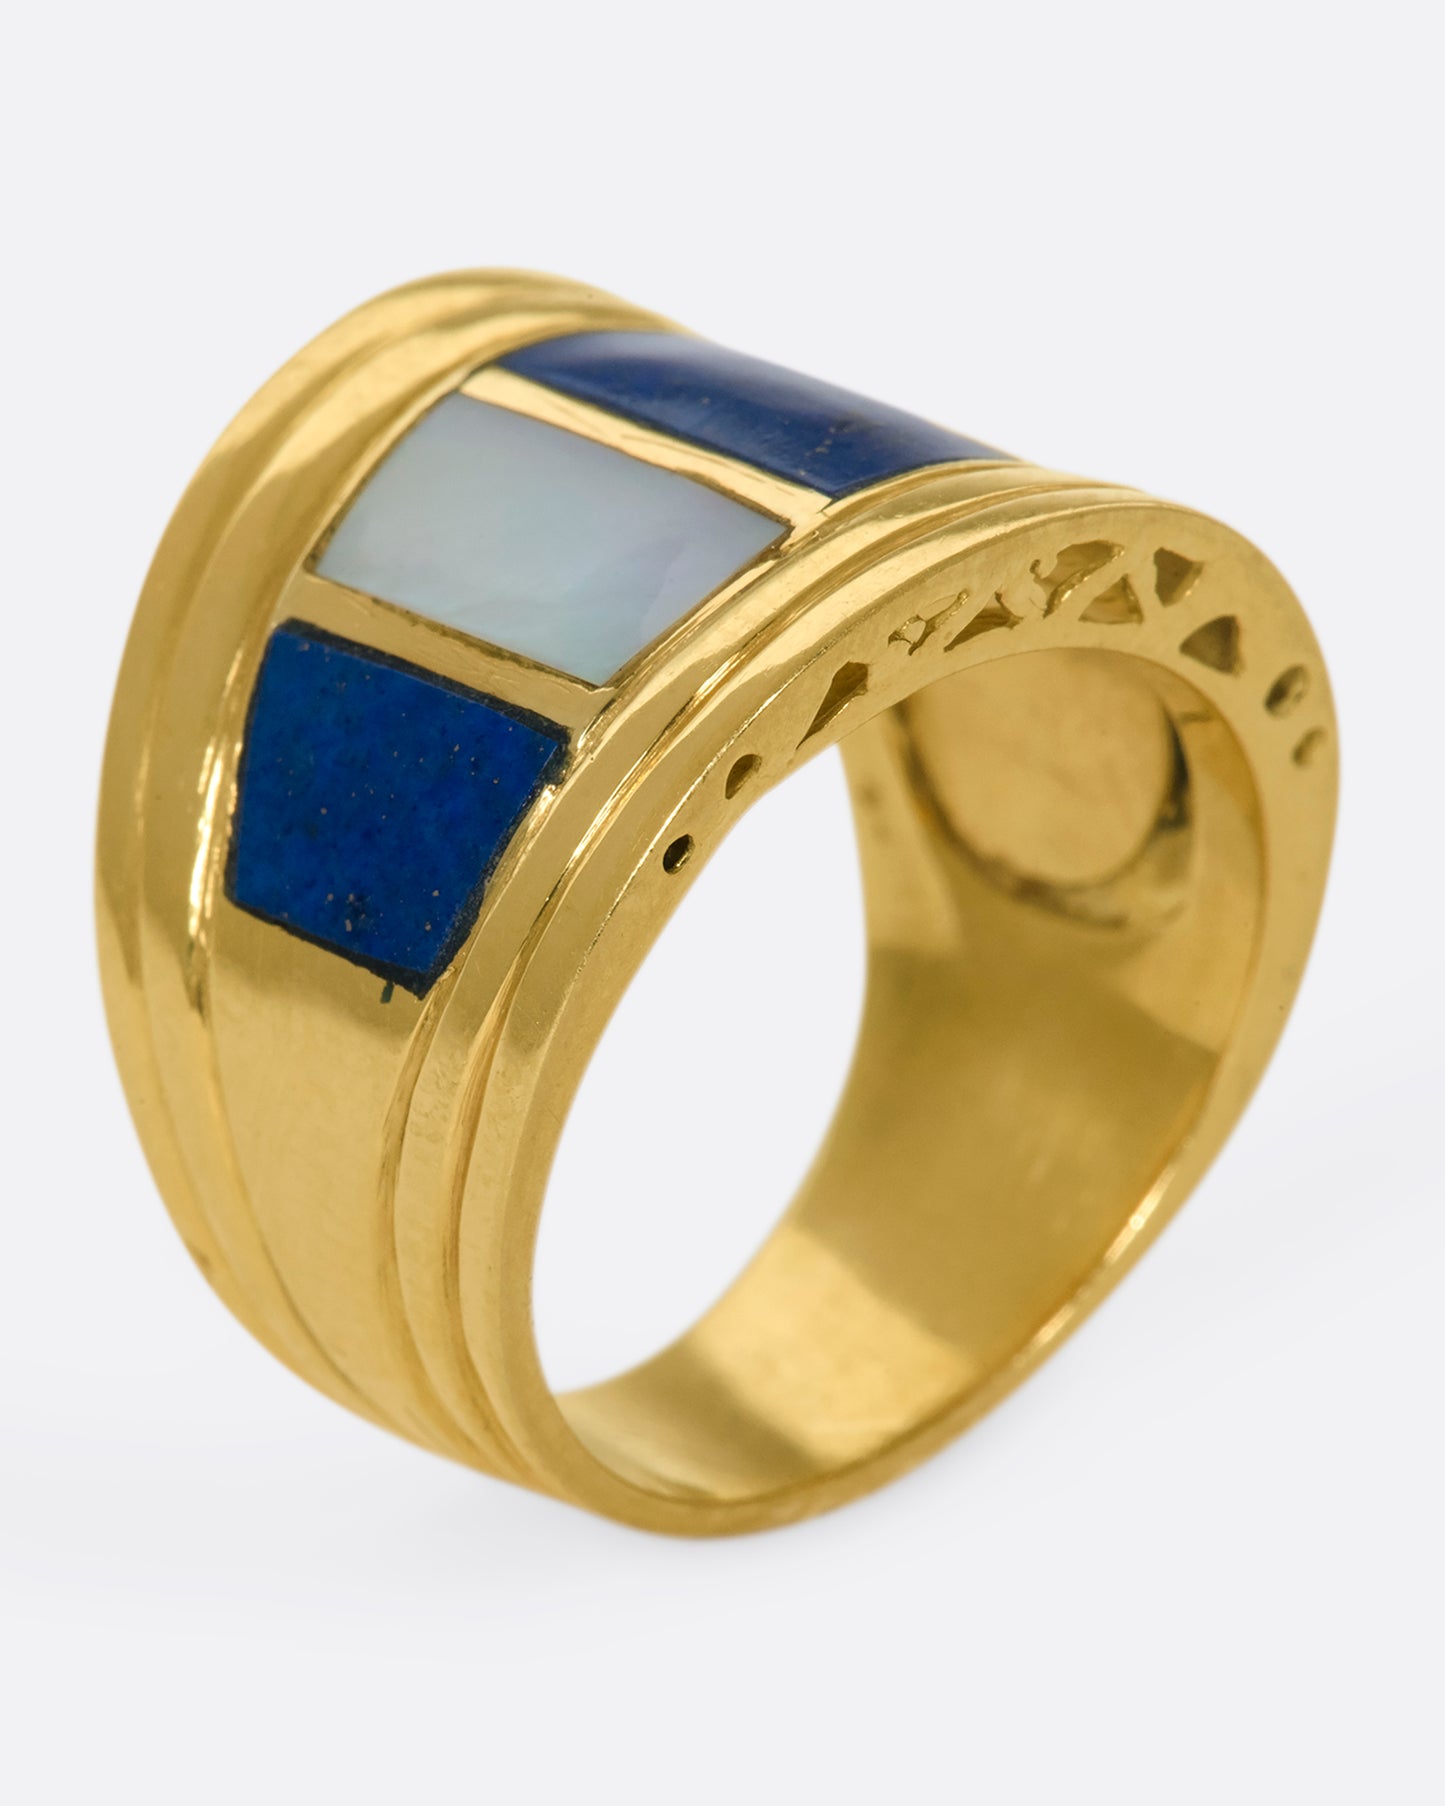 A view of a wide, tapered yellow gold ring with mother of pearl and lapis inlaid stripes standing up on its band.